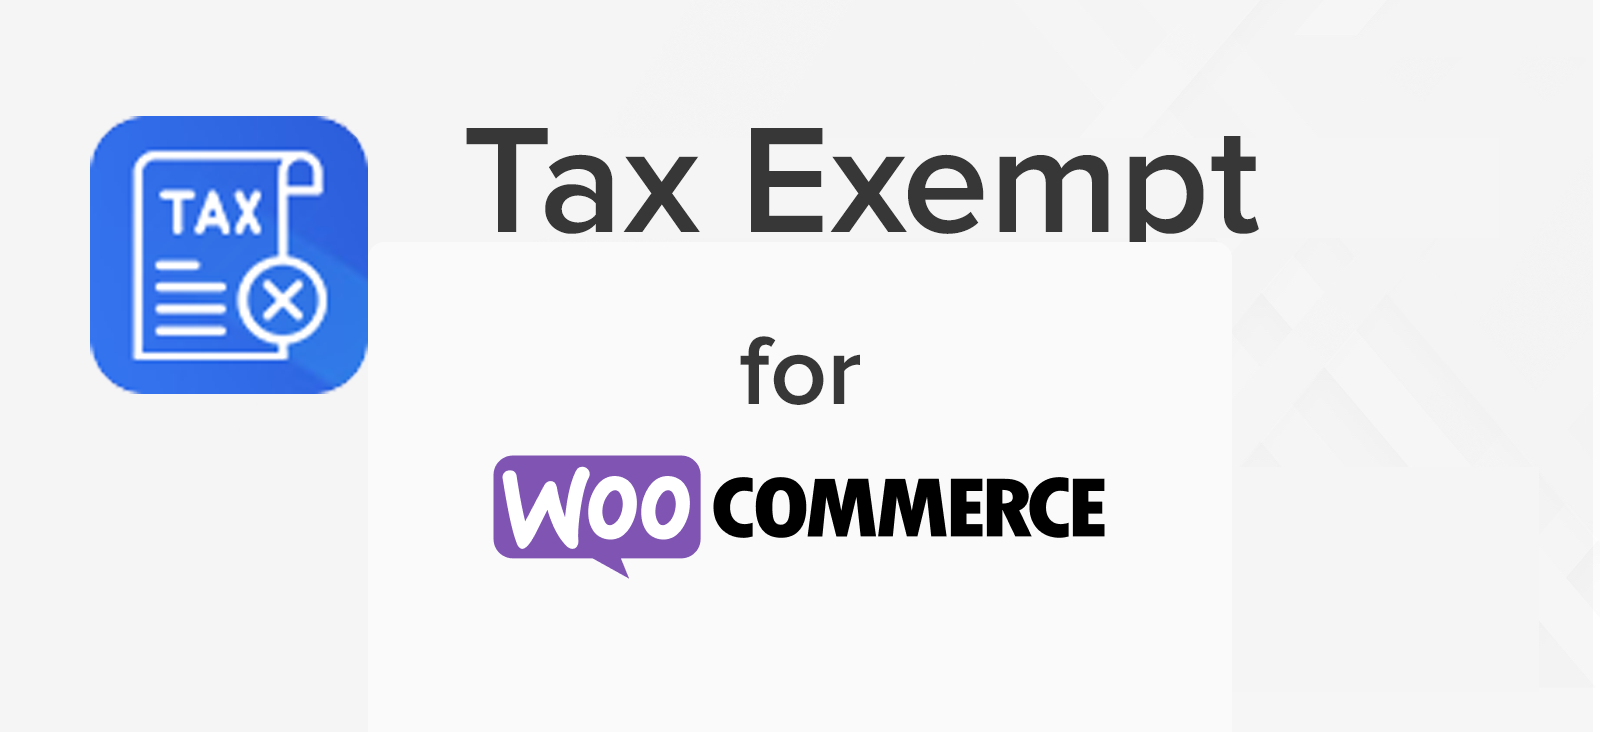 WooCommerce Tax Exempt plugin allows merchants to tax-exempt selected customers and user roles.